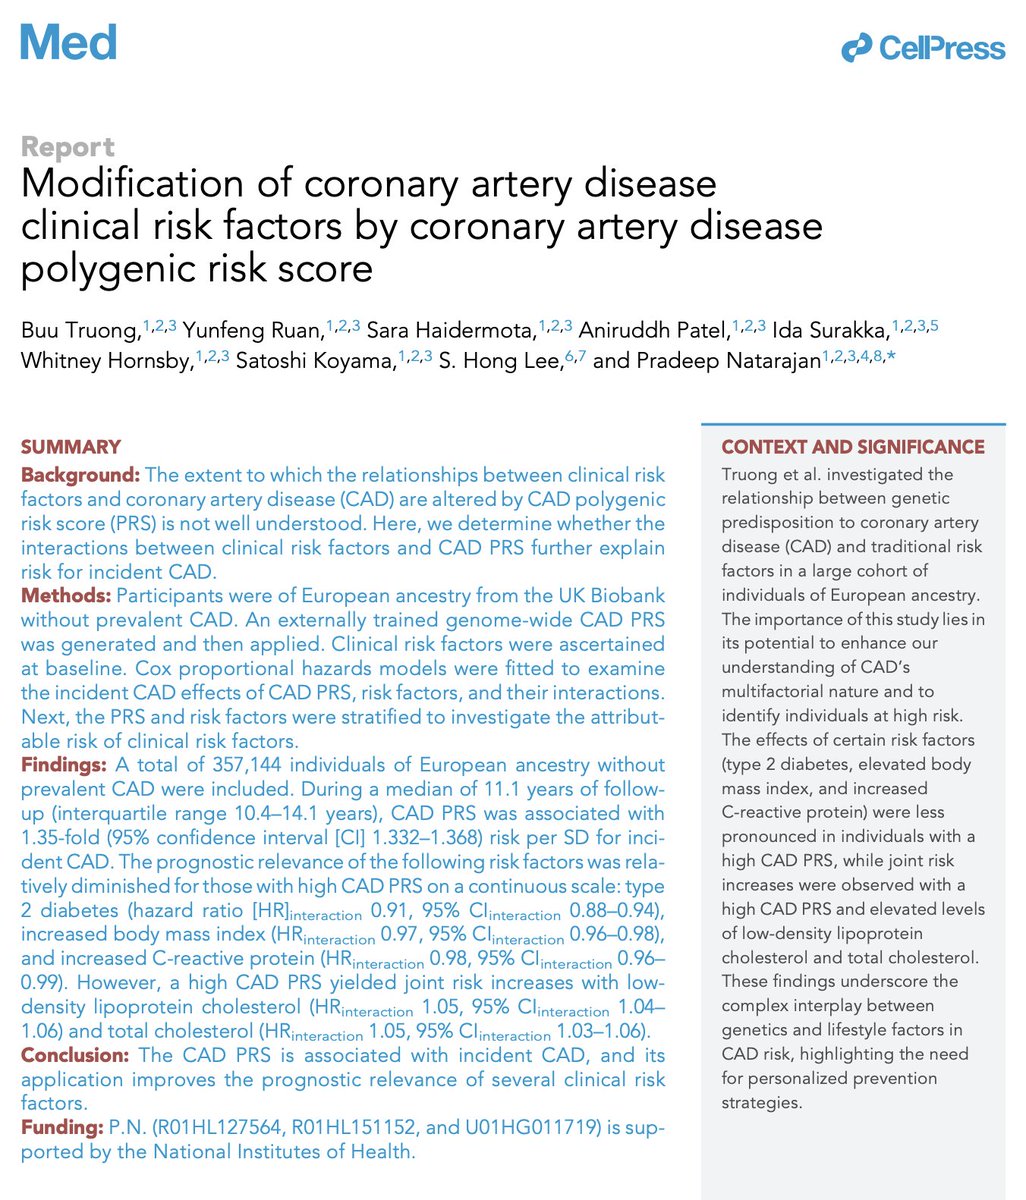 Genetic risk shouldn't be considered in isolation. Our work led by @buutrg shows how clinical risk factors and a coronary artery disease polygenic risk score interact to optimally inform coronary artery disease risk. sciencedirect.com/science/articl… @MedCellPress